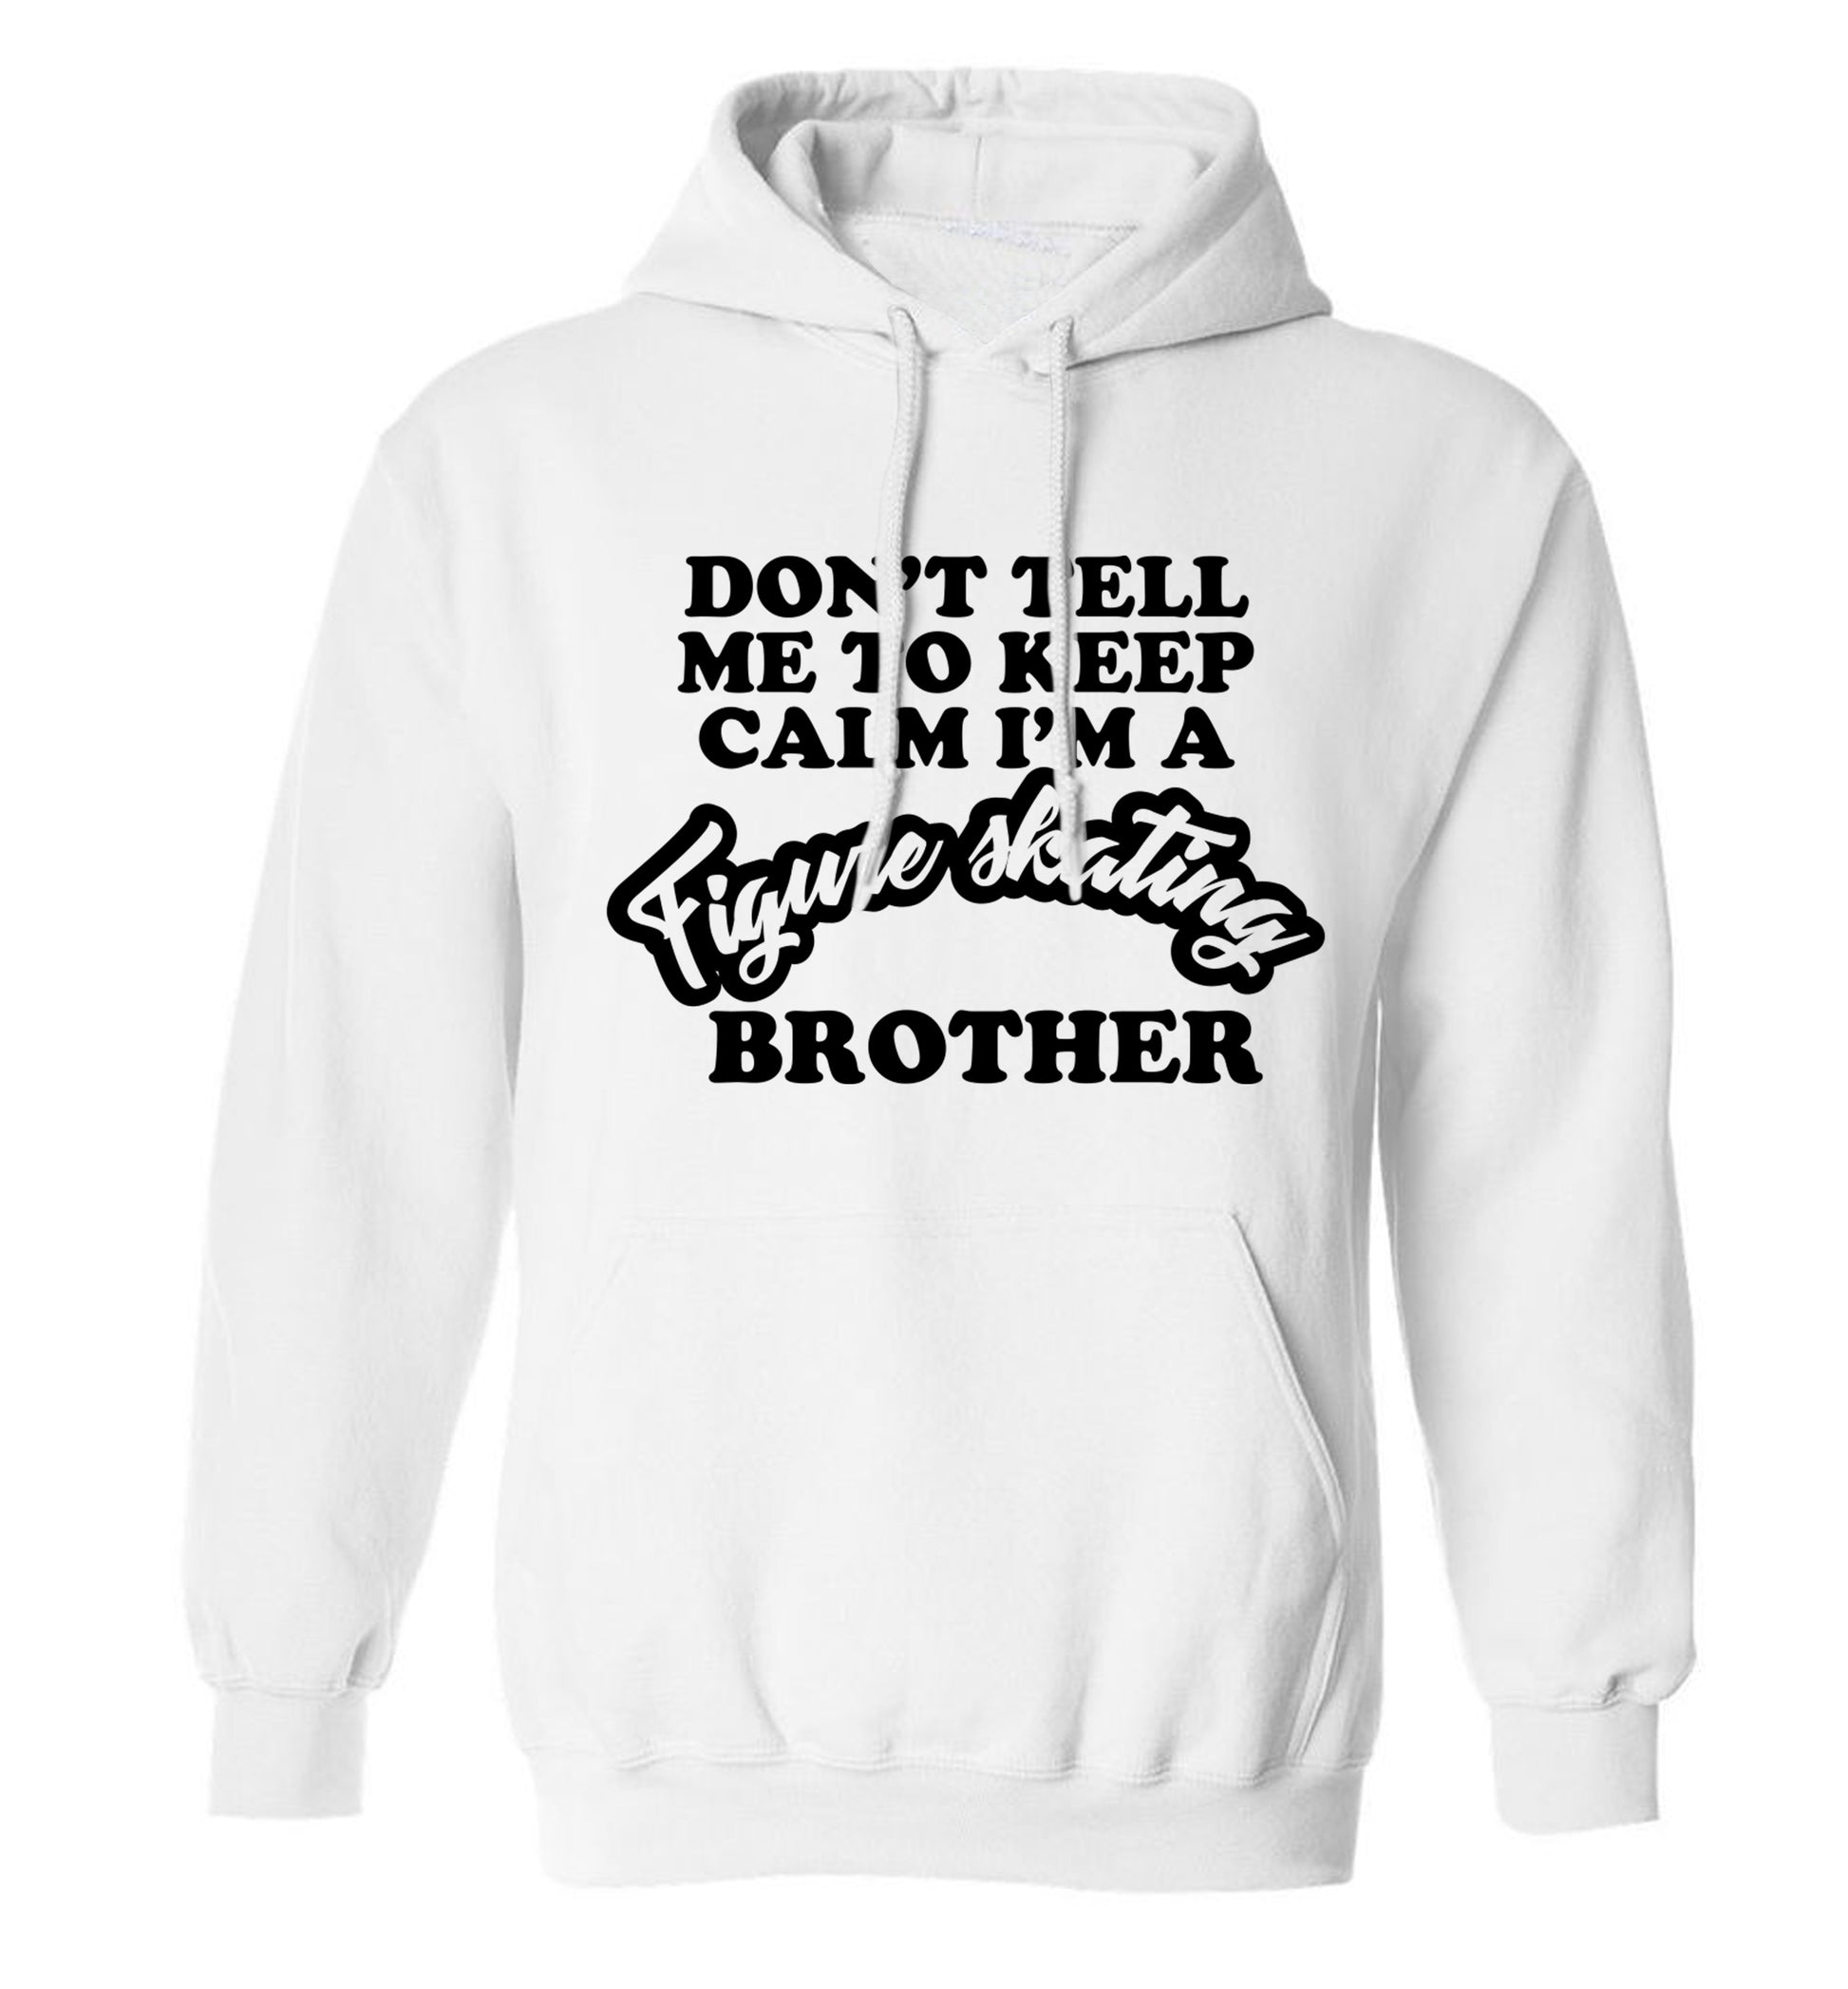 Don't tell me to keep calm I'm a figure skating brother adults unisexwhite hoodie 2XL